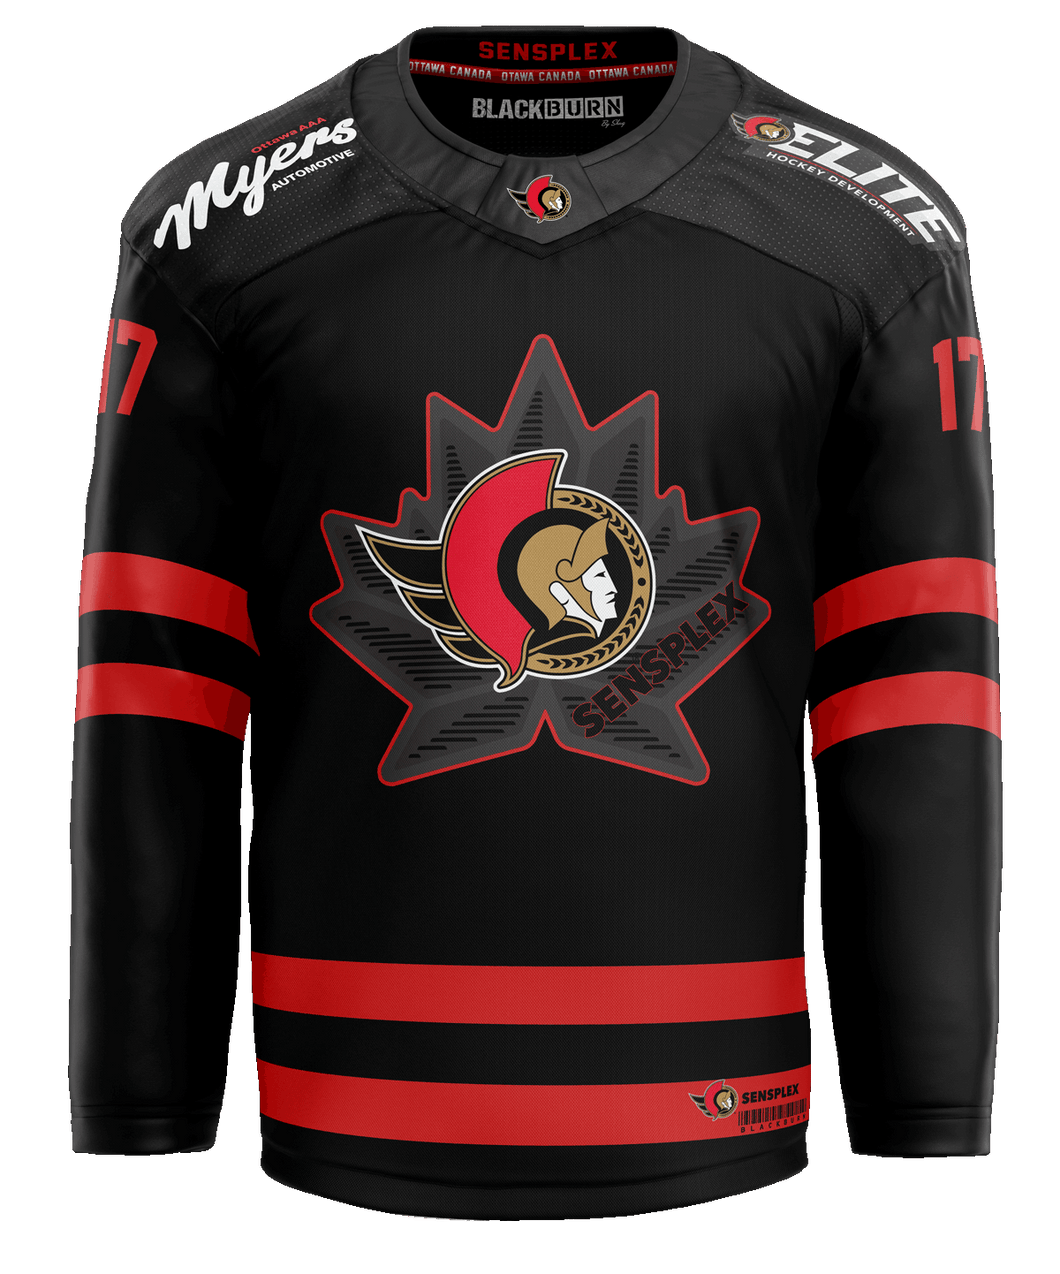 TEAM AND FAN PRIDE JERSEY- ANY COLOUR, PATTERN, OR STYLE CAN BE CREATED.